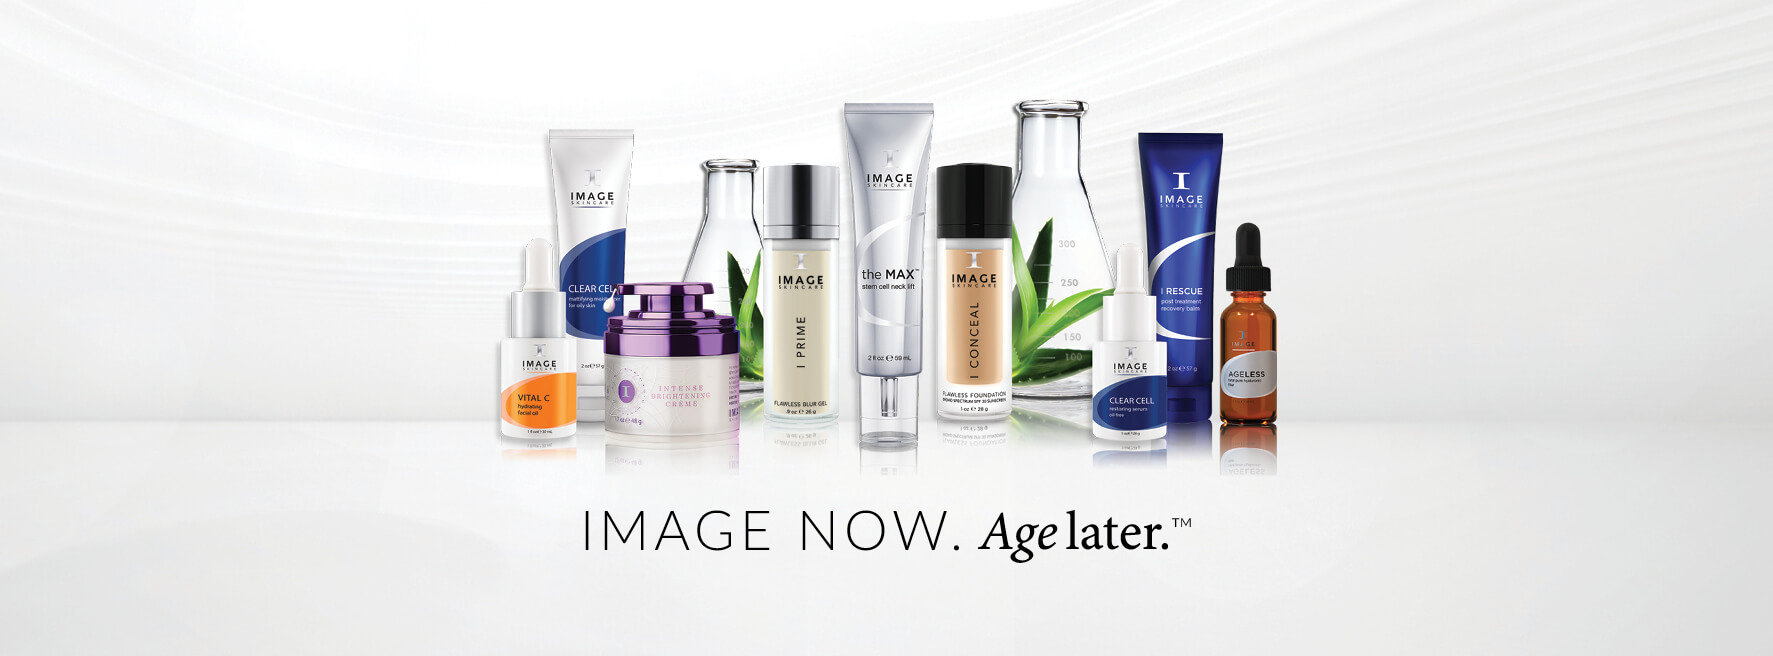 Image now age later products banner